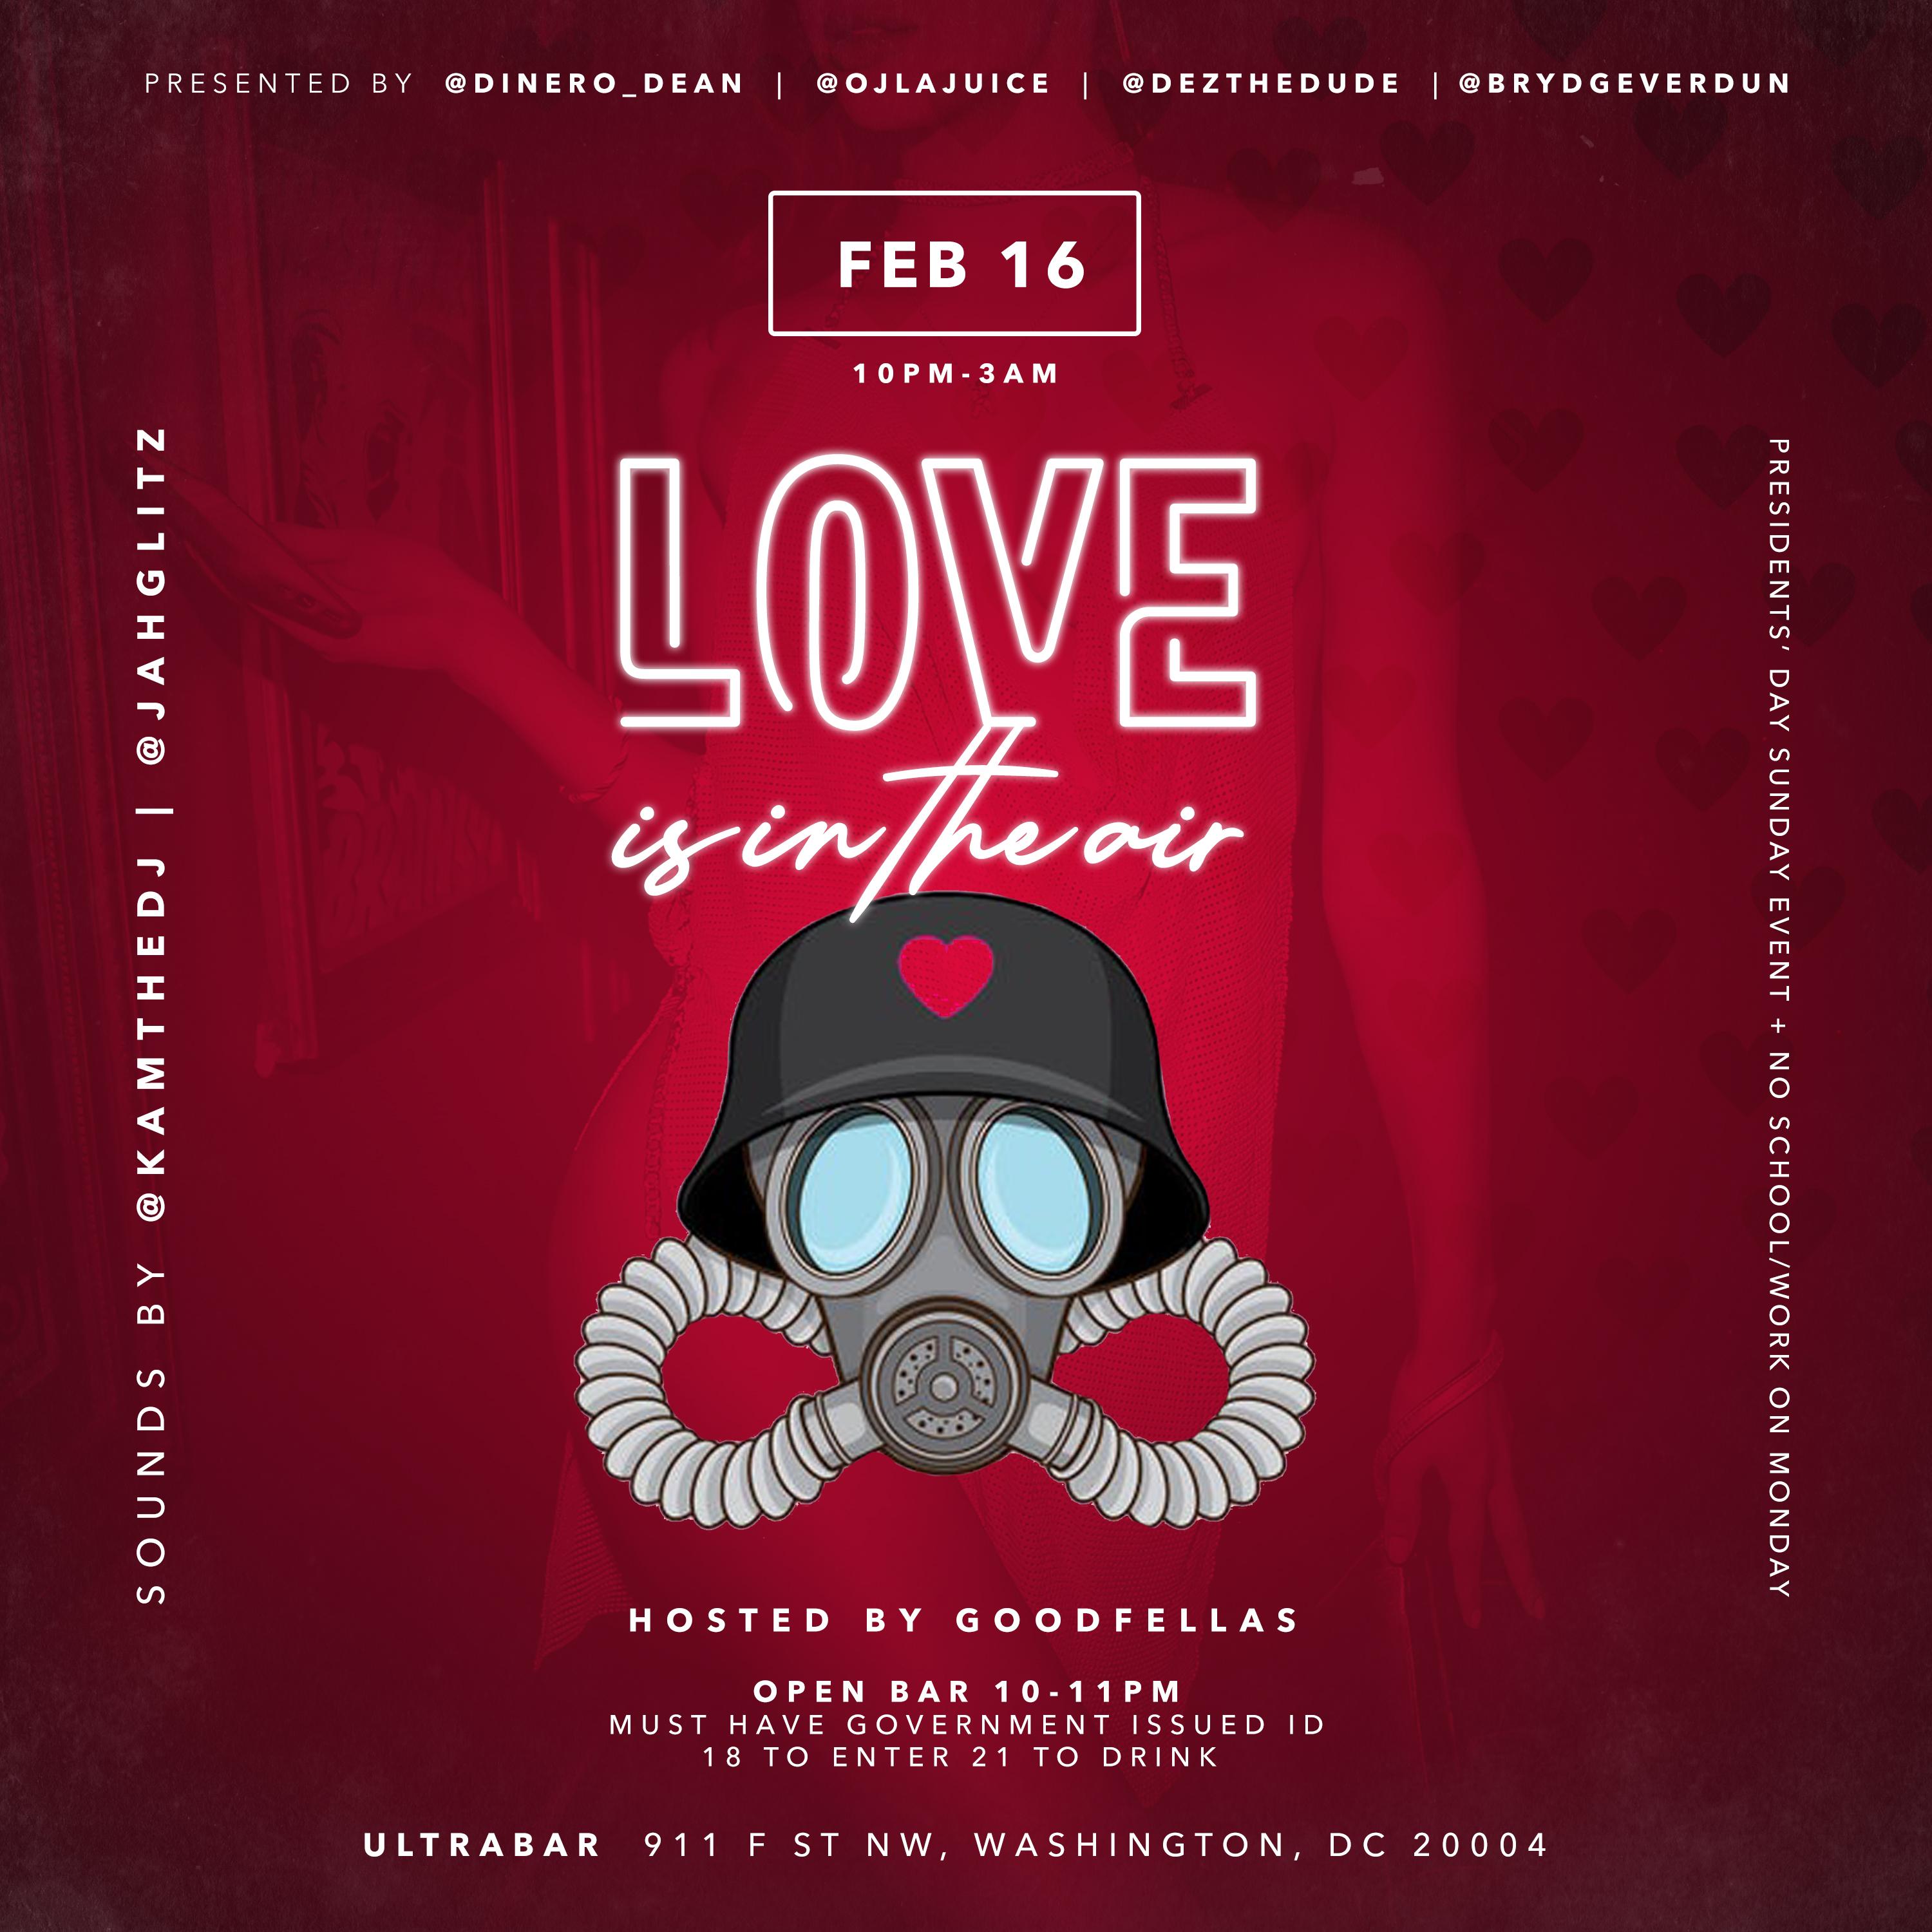 The LOVE Is In The Air Super Party @ ULTRABAR This Sunday Night!